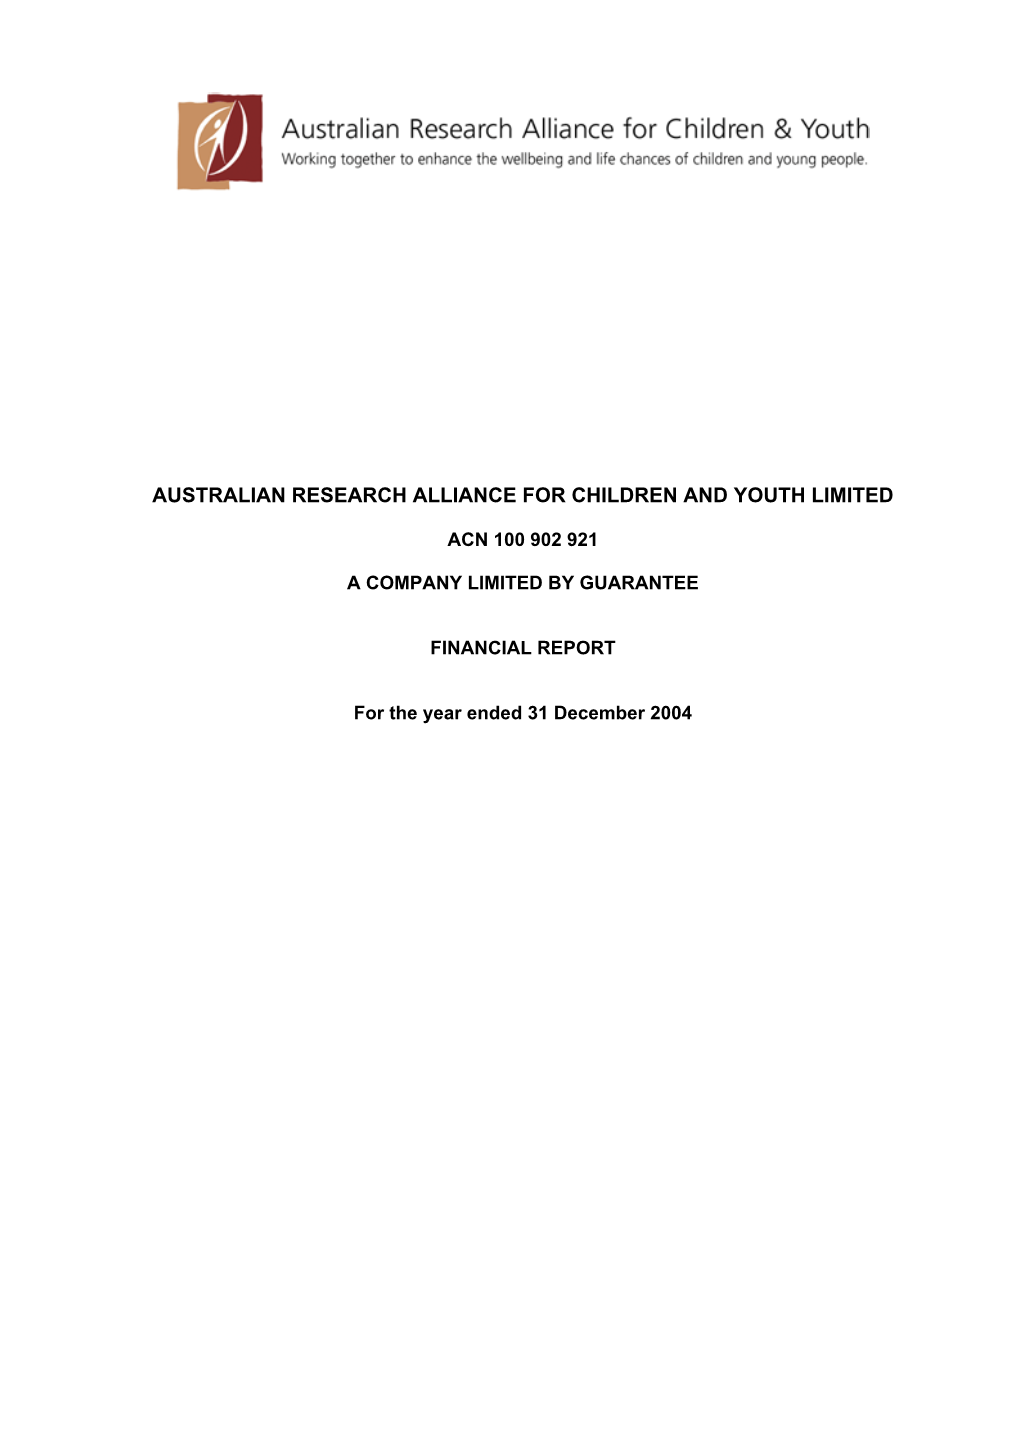 Australian Research Alliance for Children and Youth Limited